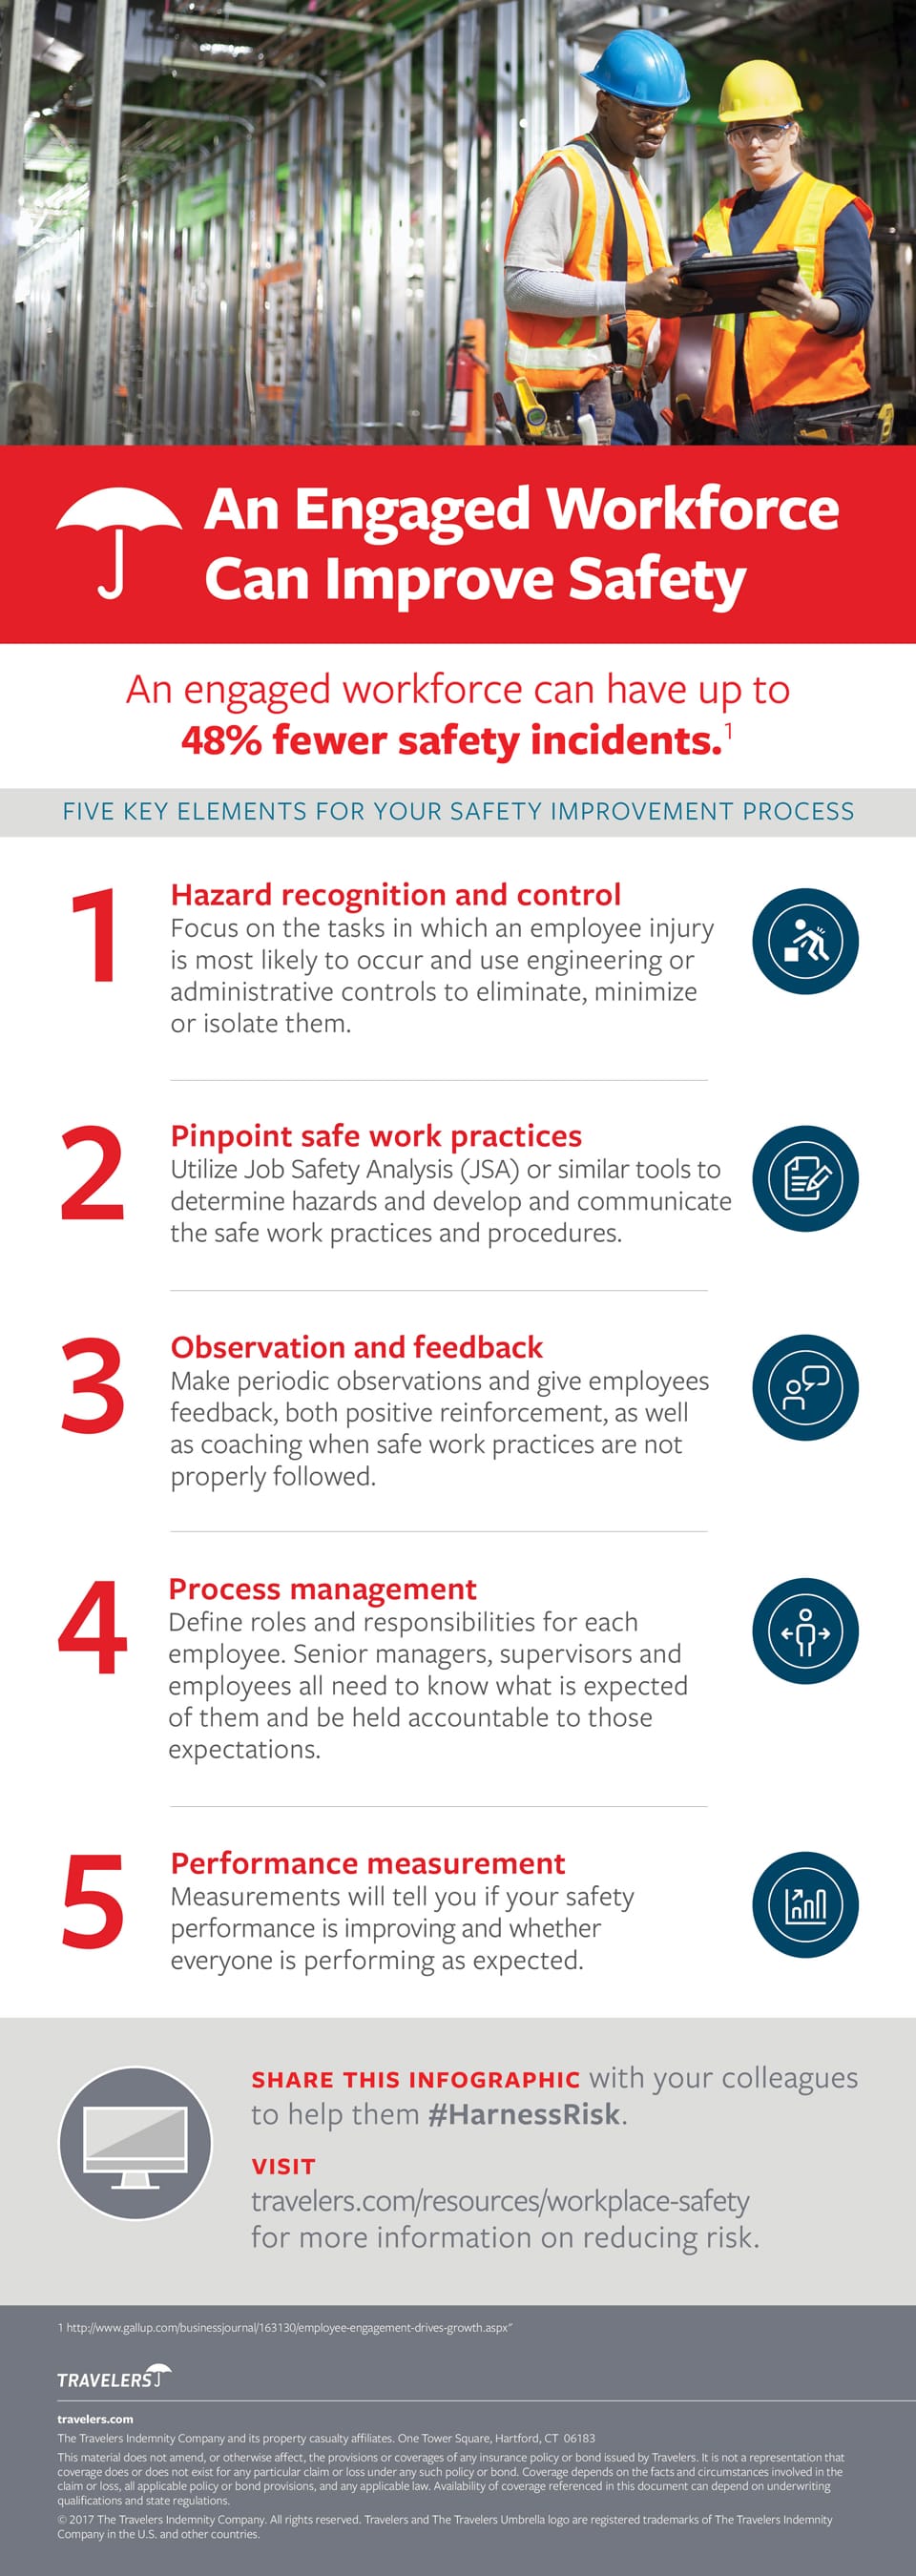 An Engaged Workforce Can Improve Safety [Infographic]